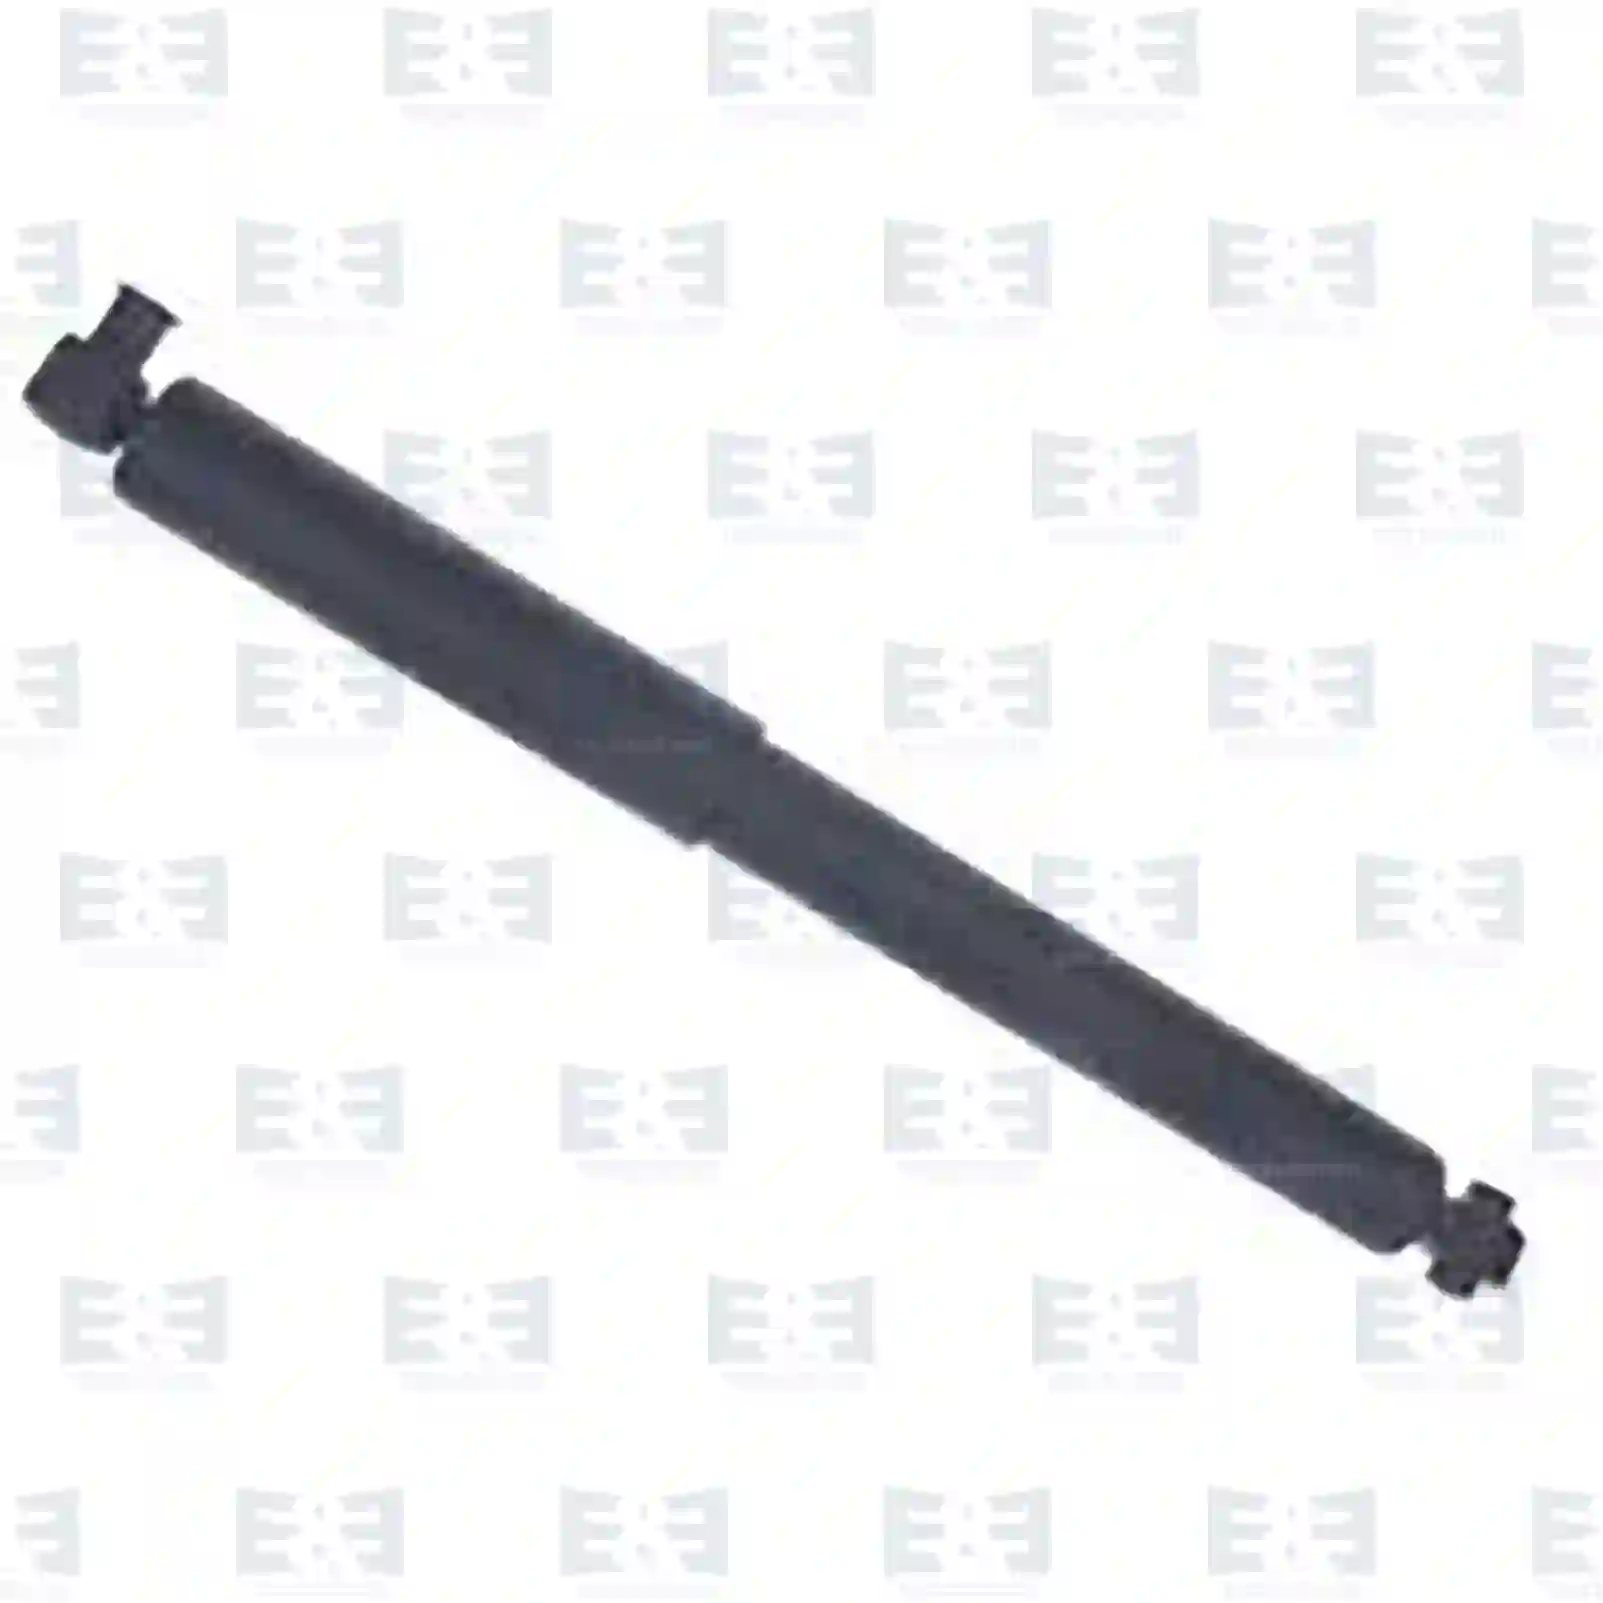 Shock absorber, rear, 2E2270082, 1371361, 1408260, 1445078, 1605783, 6C11-18080-LC, 6C11-18080-MC, 6C11-18080-MD, 6C11-18080-NB ||  2E2270082 E&E Truck Spare Parts | Truck Spare Parts, Auotomotive Spare Parts Shock absorber, rear, 2E2270082, 1371361, 1408260, 1445078, 1605783, 6C11-18080-LC, 6C11-18080-MC, 6C11-18080-MD, 6C11-18080-NB ||  2E2270082 E&E Truck Spare Parts | Truck Spare Parts, Auotomotive Spare Parts